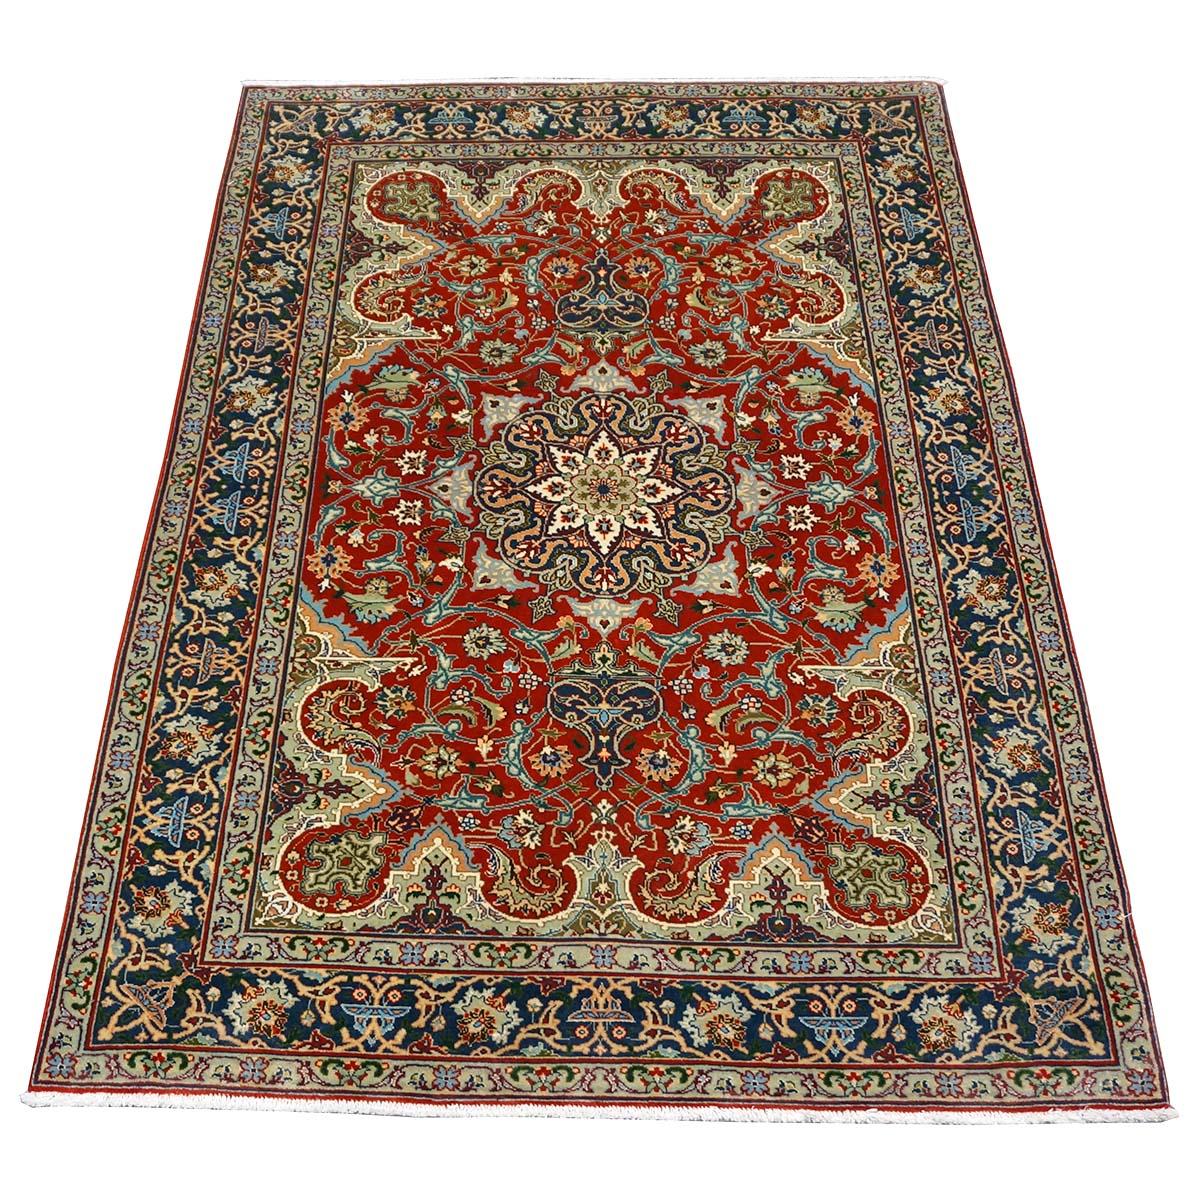 Antique 1940s Fine Persian Tabriz 3x4 Red, Navy, & Blue Handmade Area Rug In Excellent Condition For Sale In Houston, TX